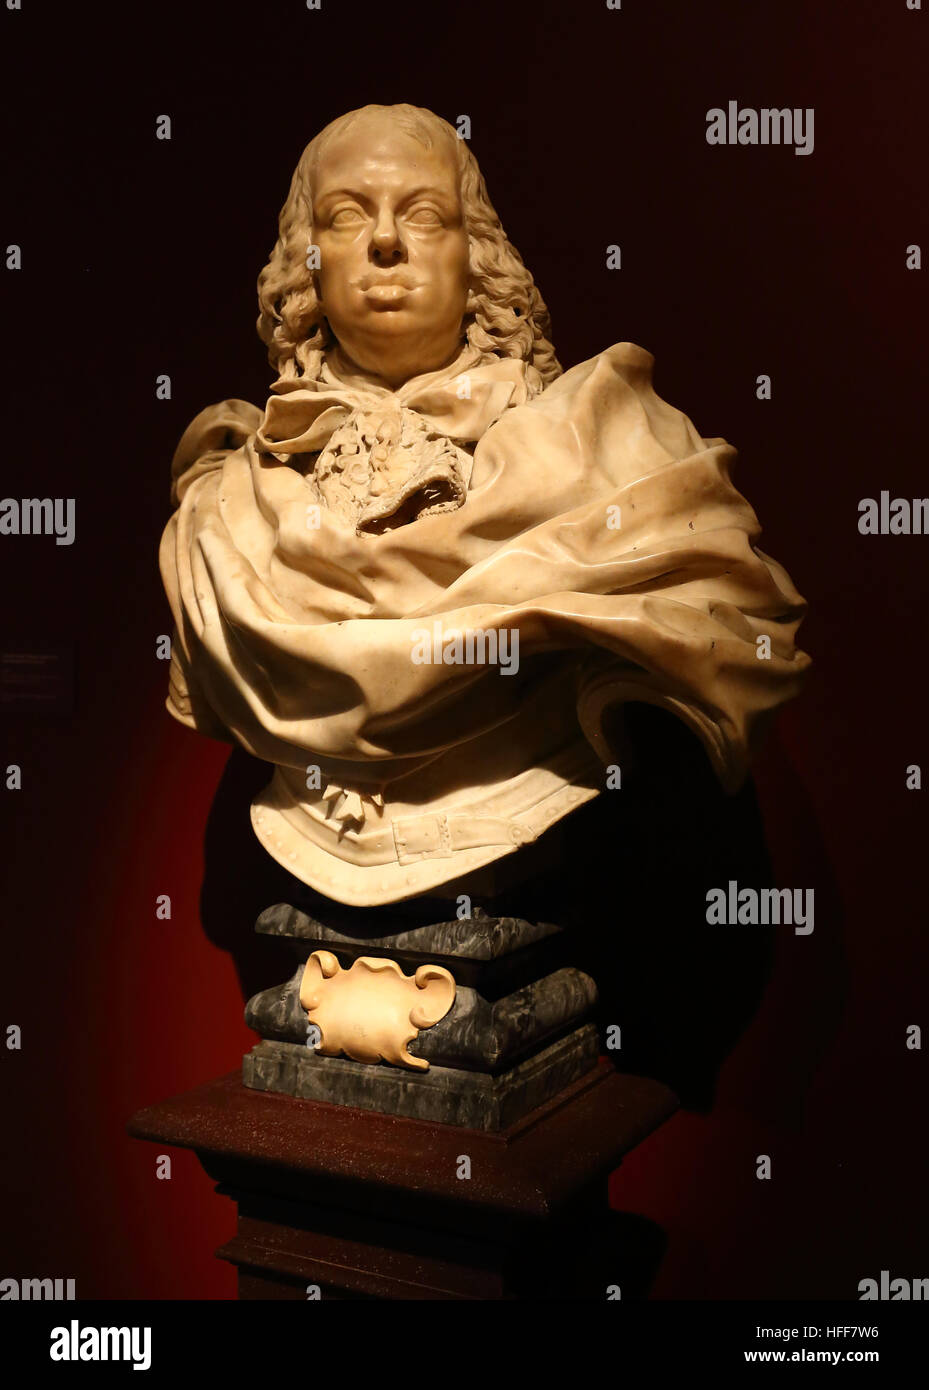 A sculpture on display at the Metropolitan Museum of Art in New York City. Stock Photo